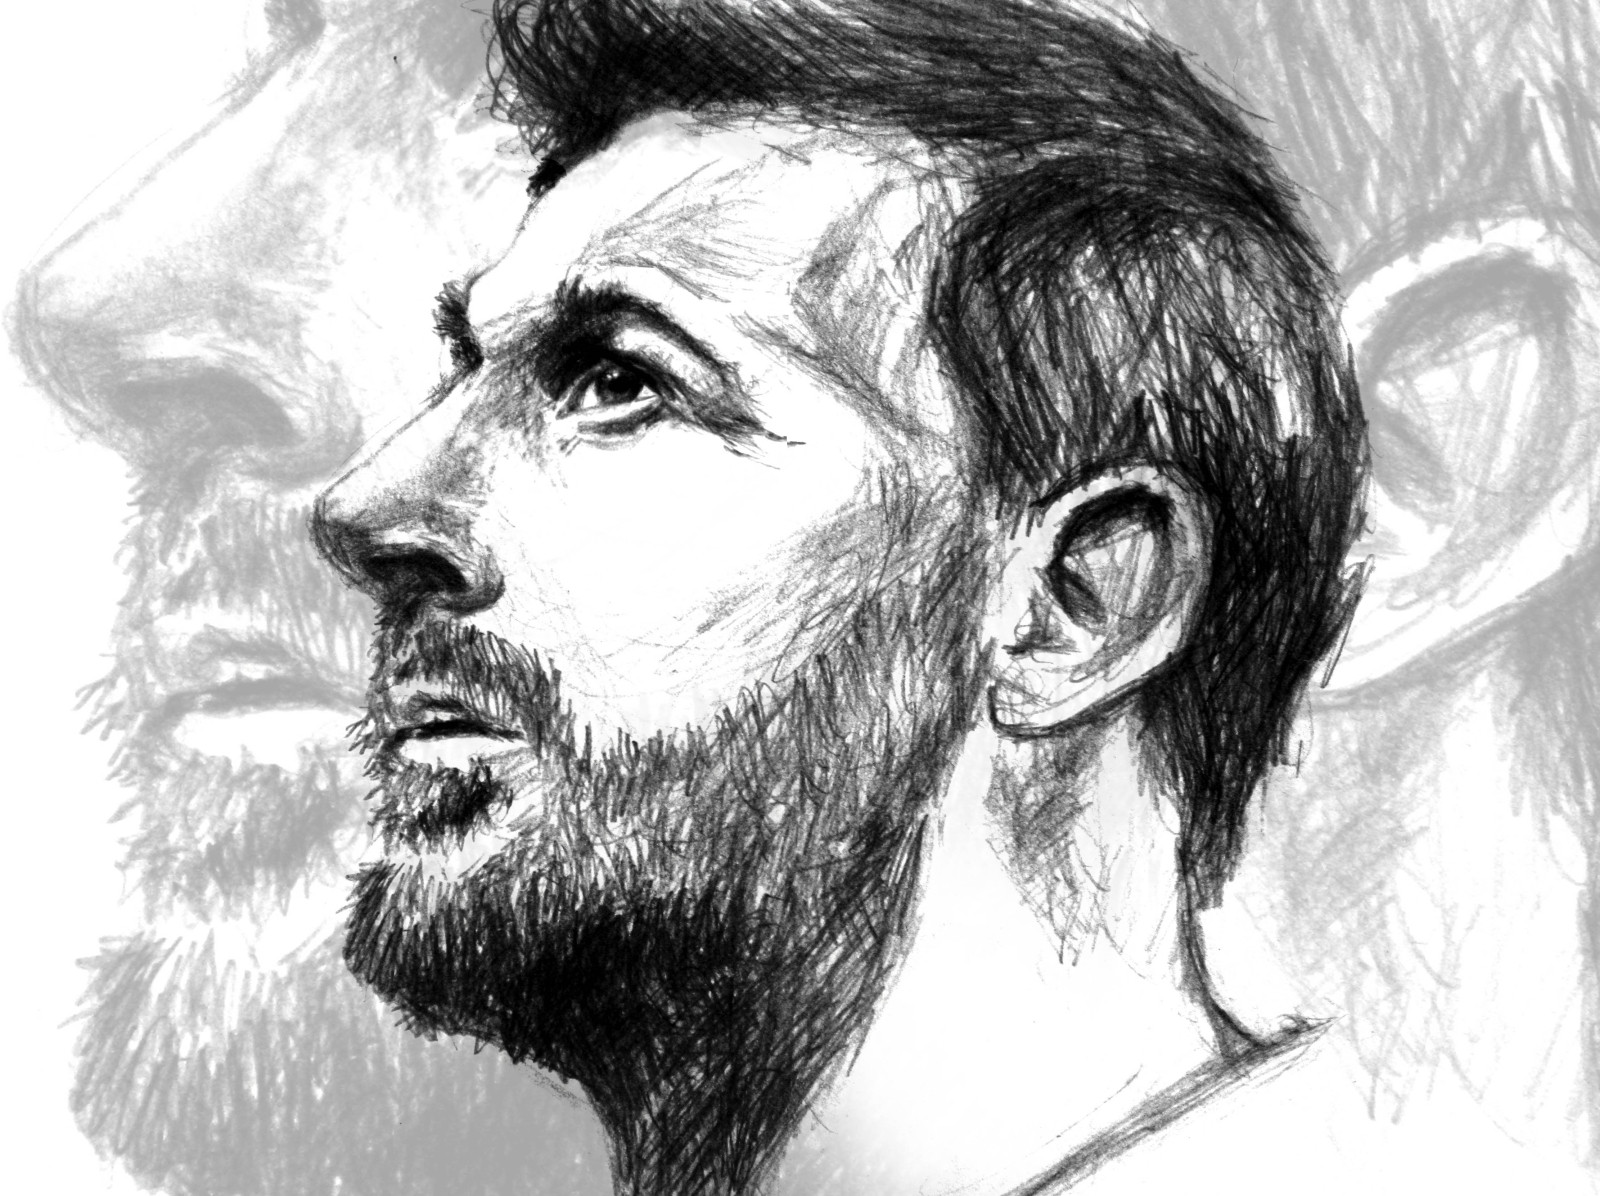 How to Draw Lionel Messi Portrait - Drawing Messi Sketch - Draw Lionel Messi  with a Beard - YouTube